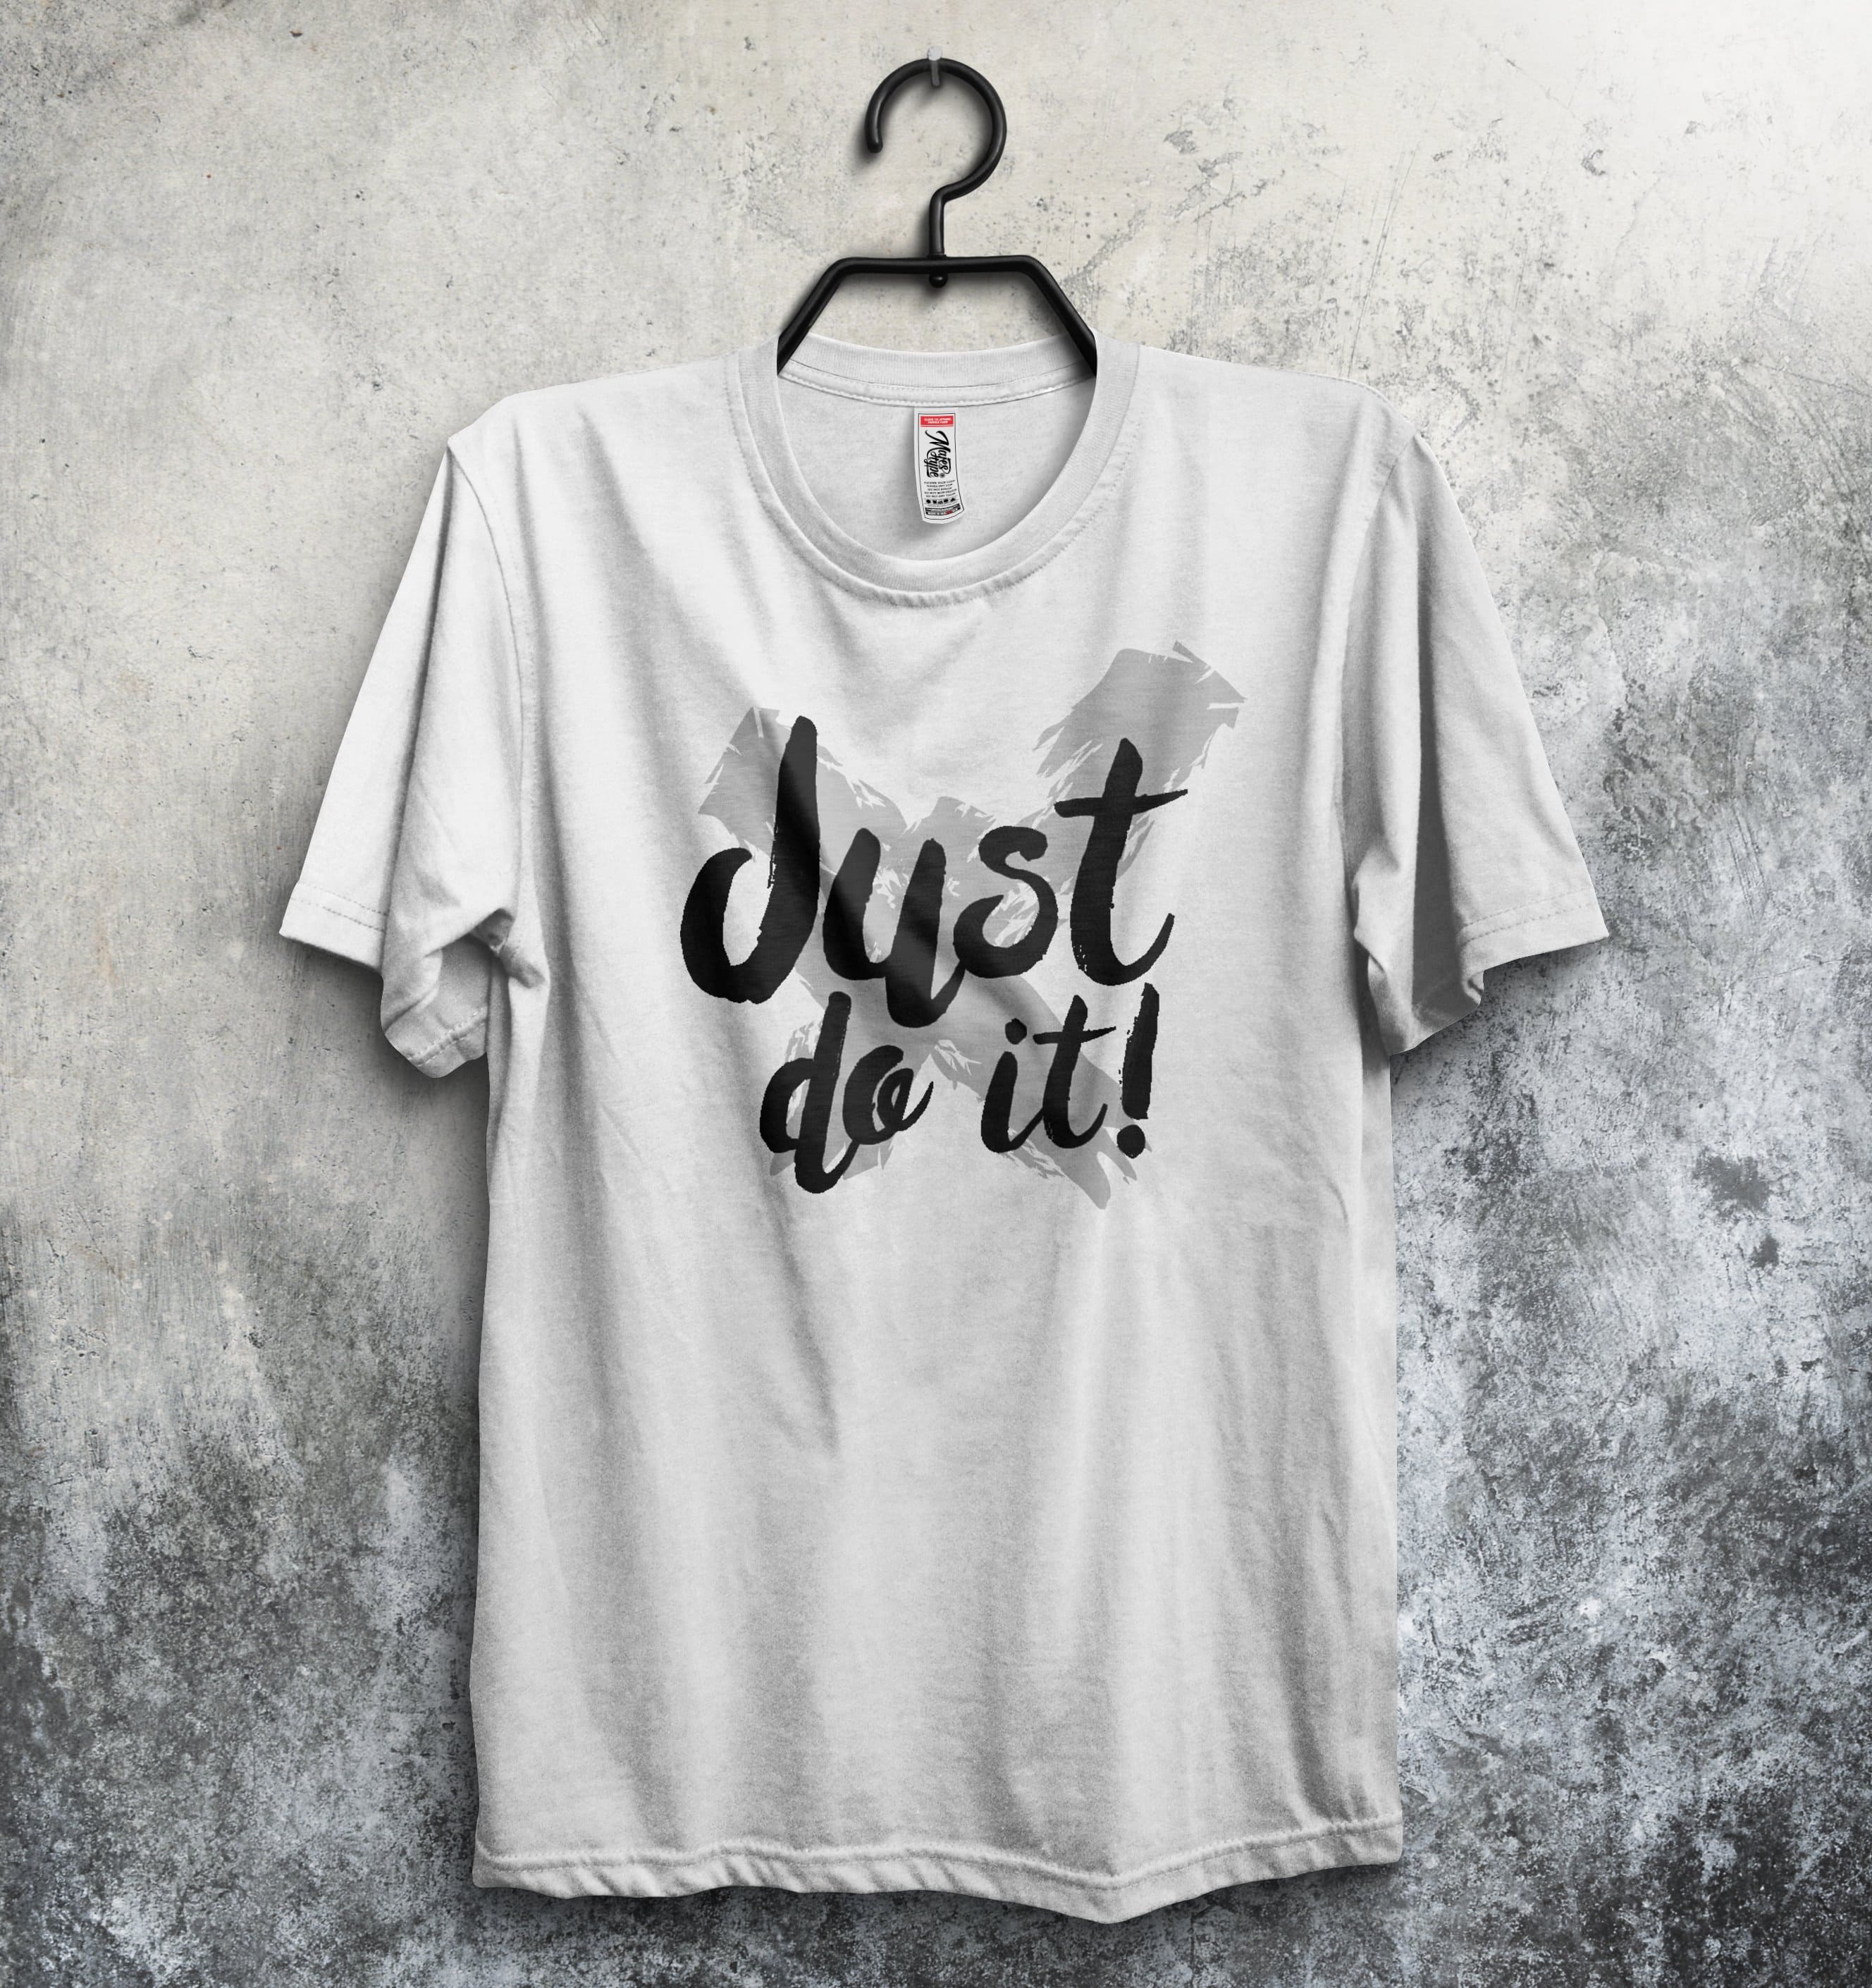 White classic t-shirt with silver phrase.